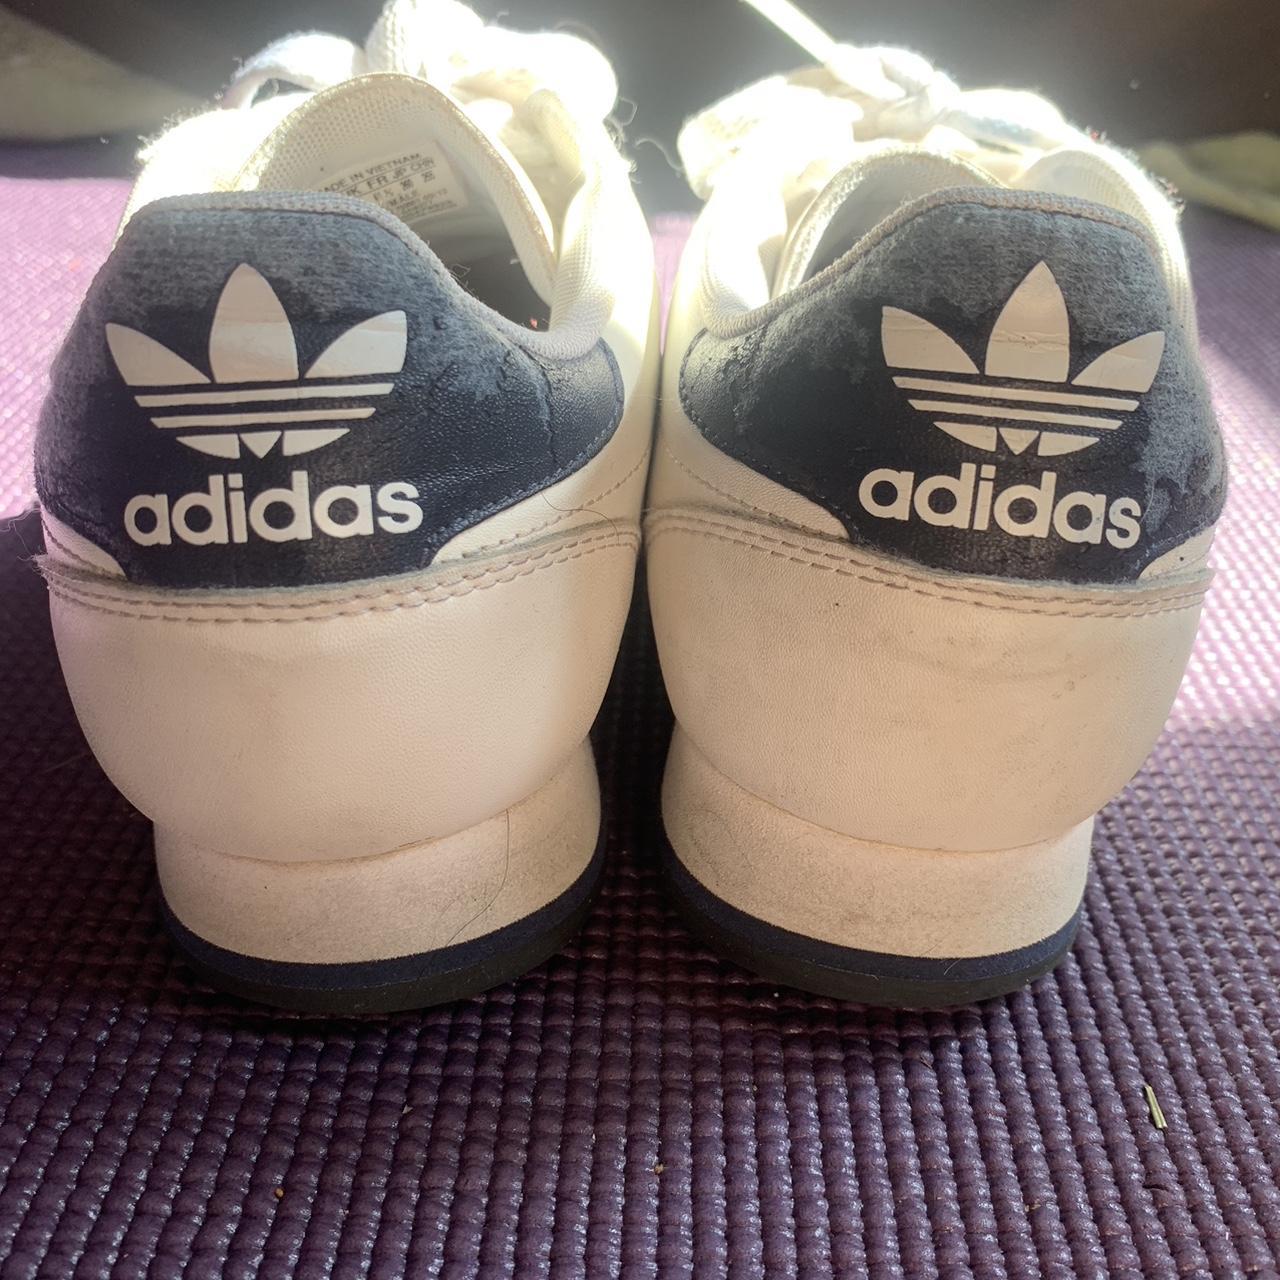 Adidas Men's Navy and White Trainers (3)